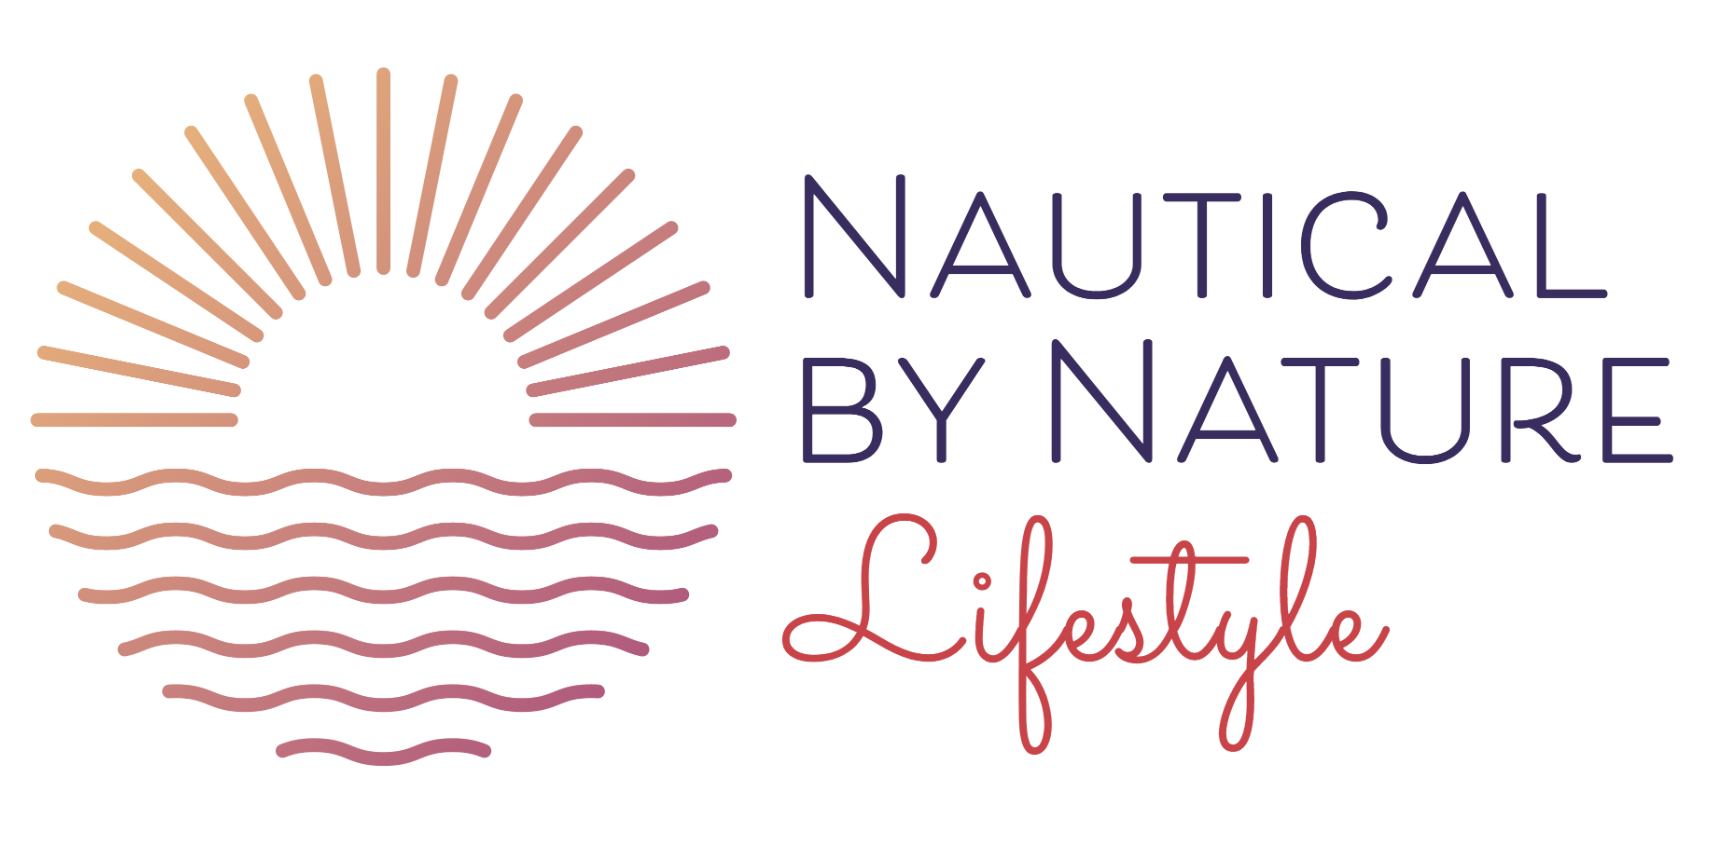 Nautical by Nature Lifestyle